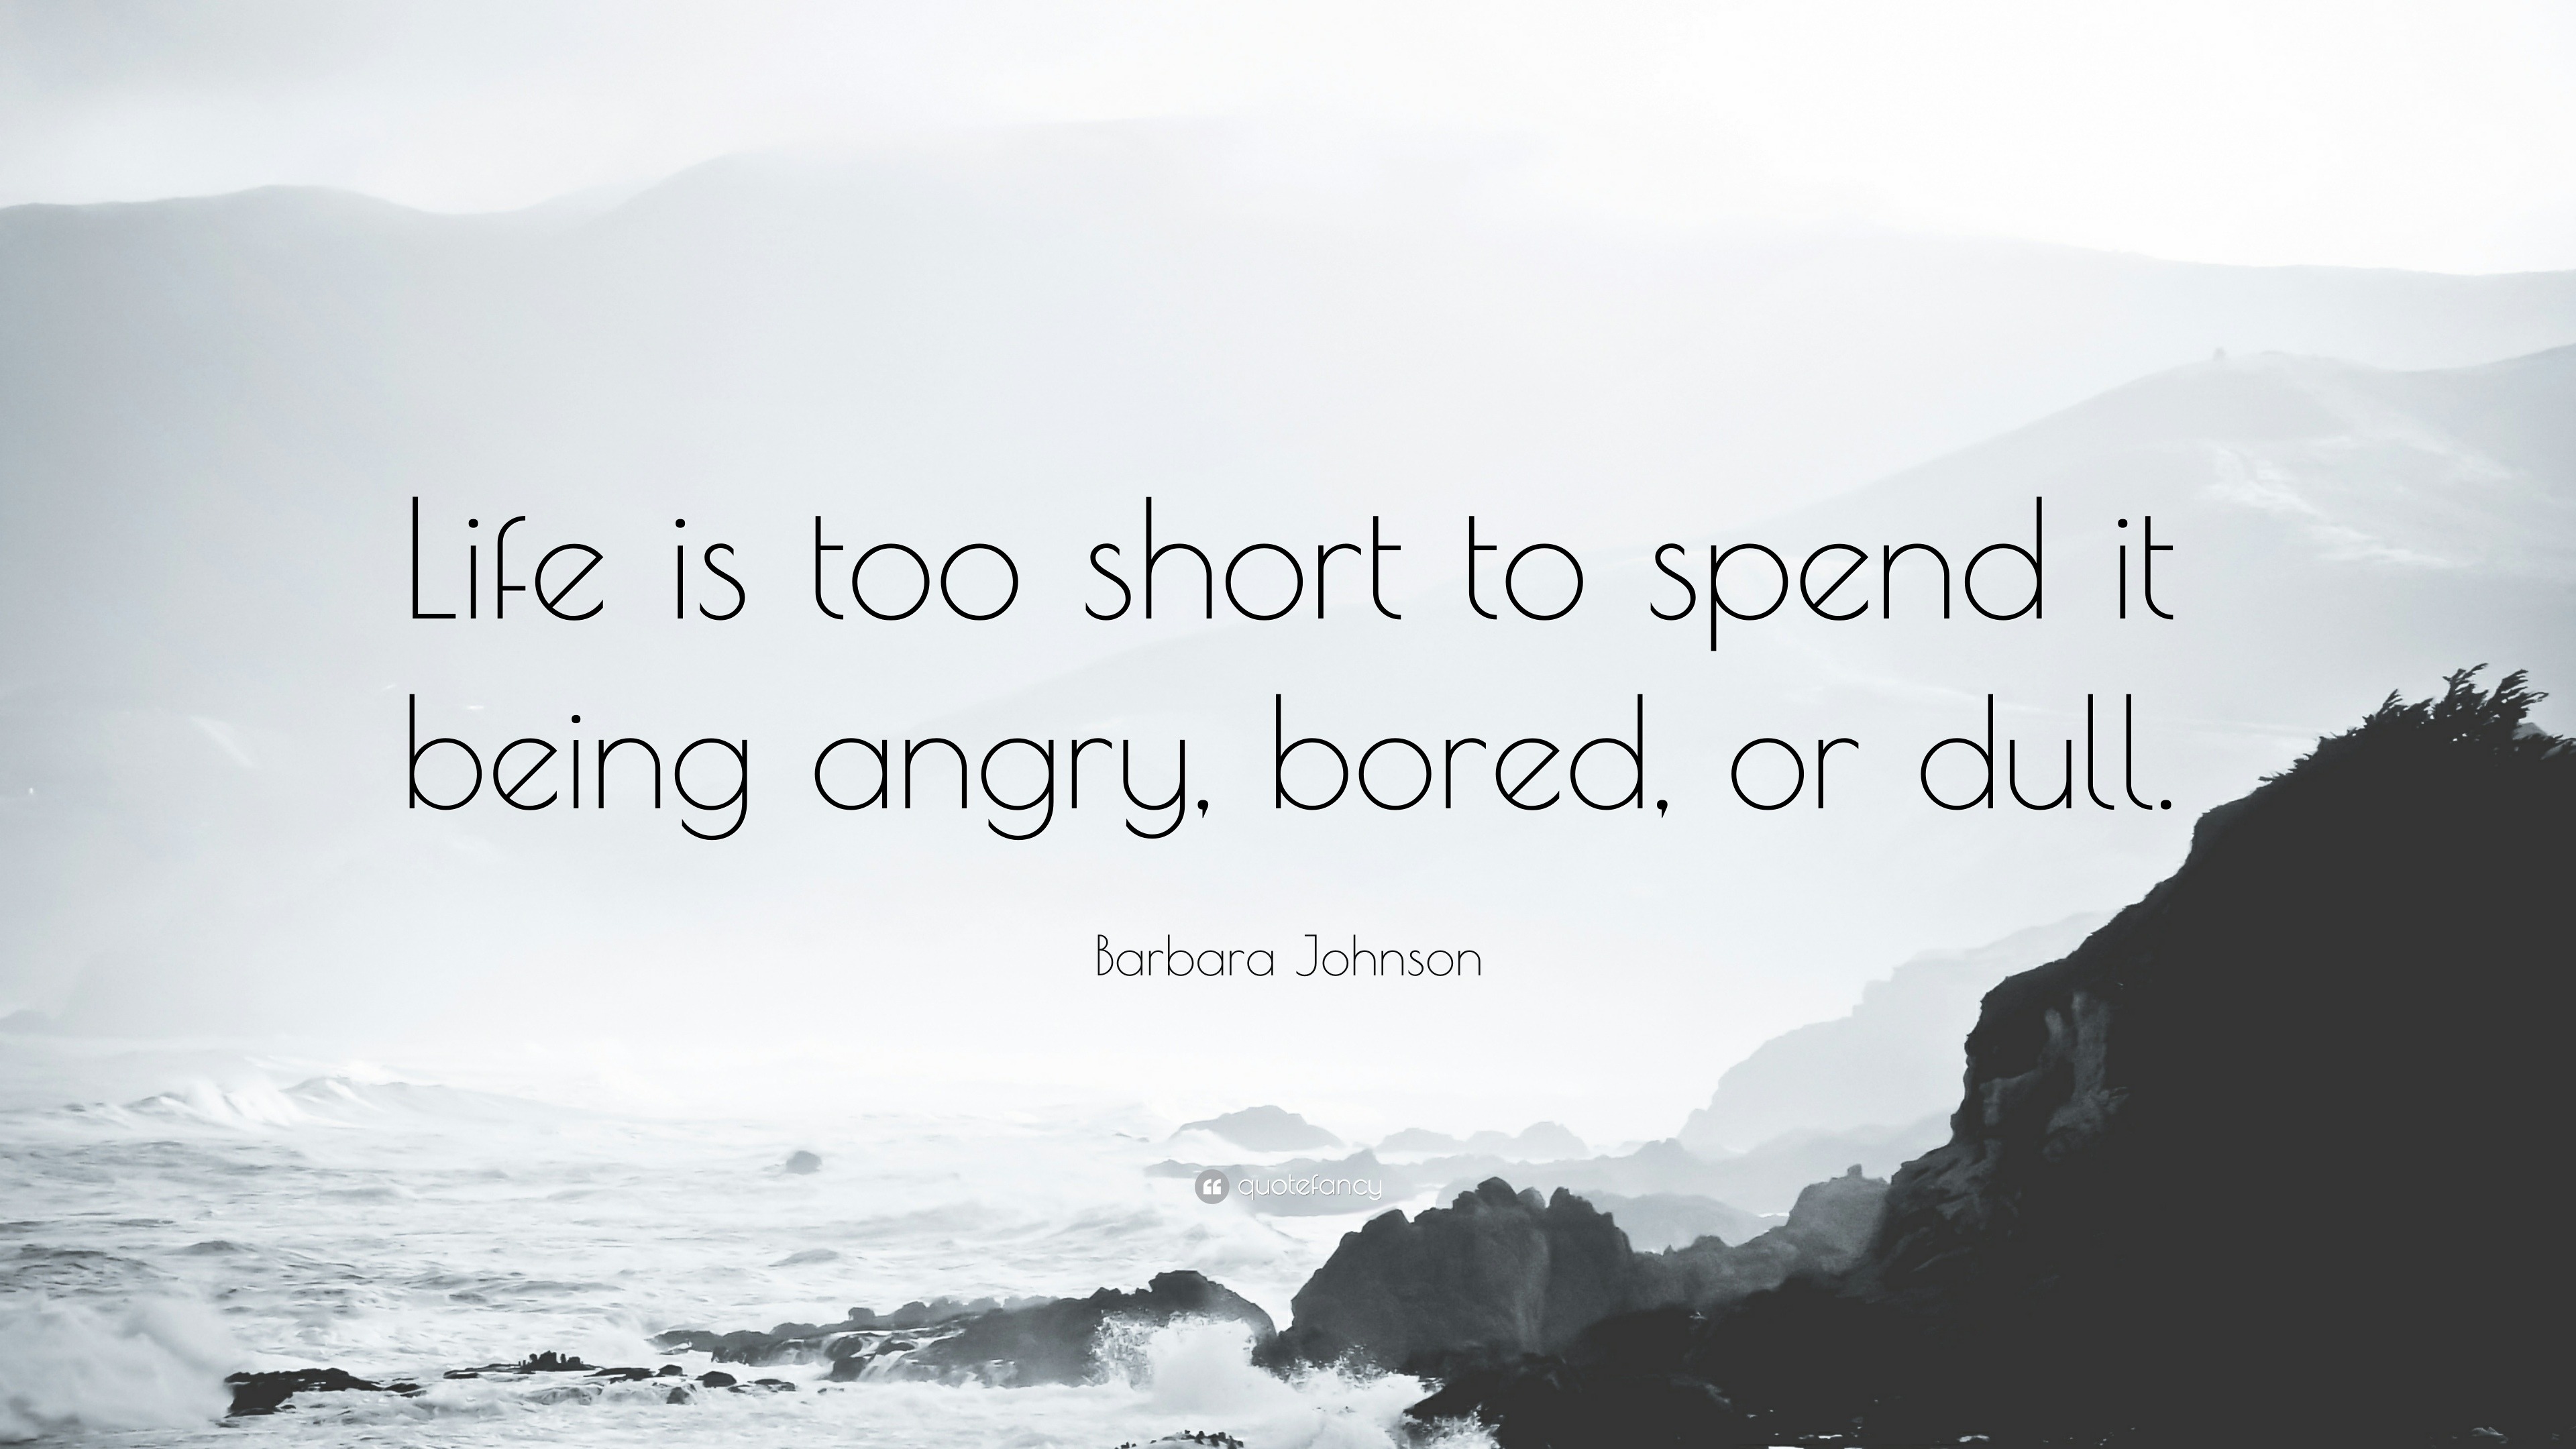 Barbara Johnson Quote “Life is too short to spend it being angry bored